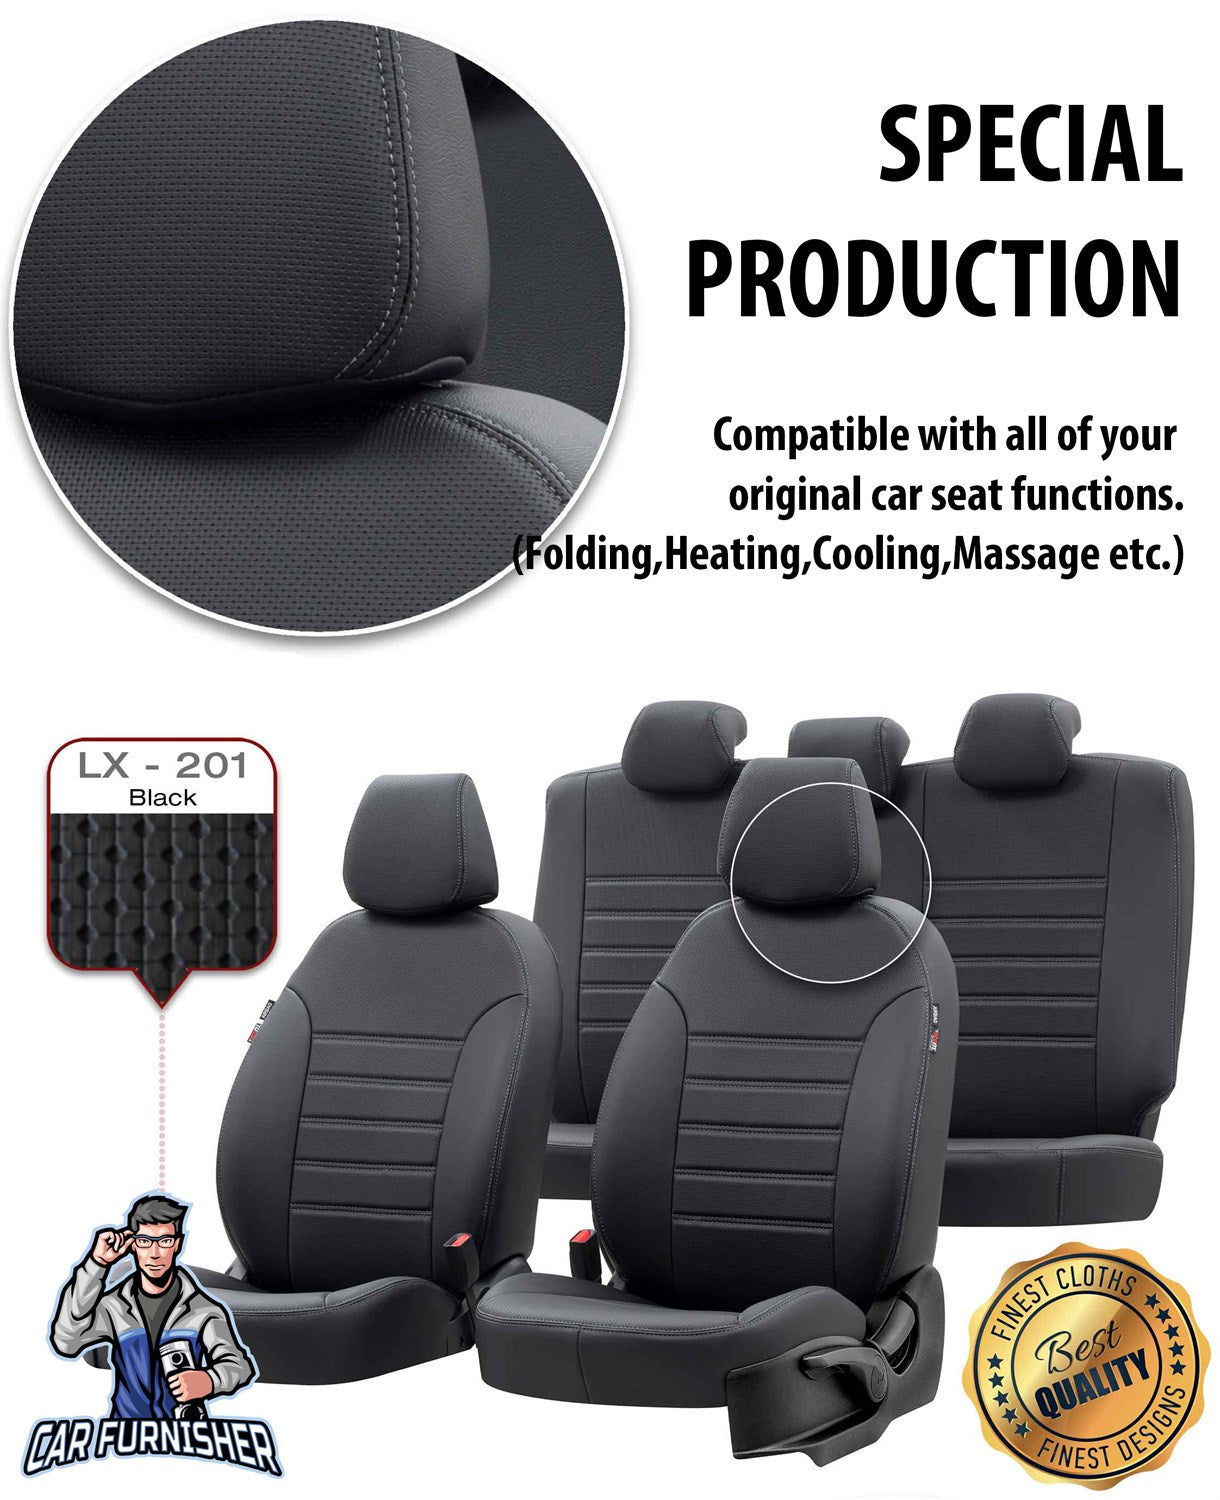 Renault Twingo Seat Cover New York Leather Design Smoked Black Leather